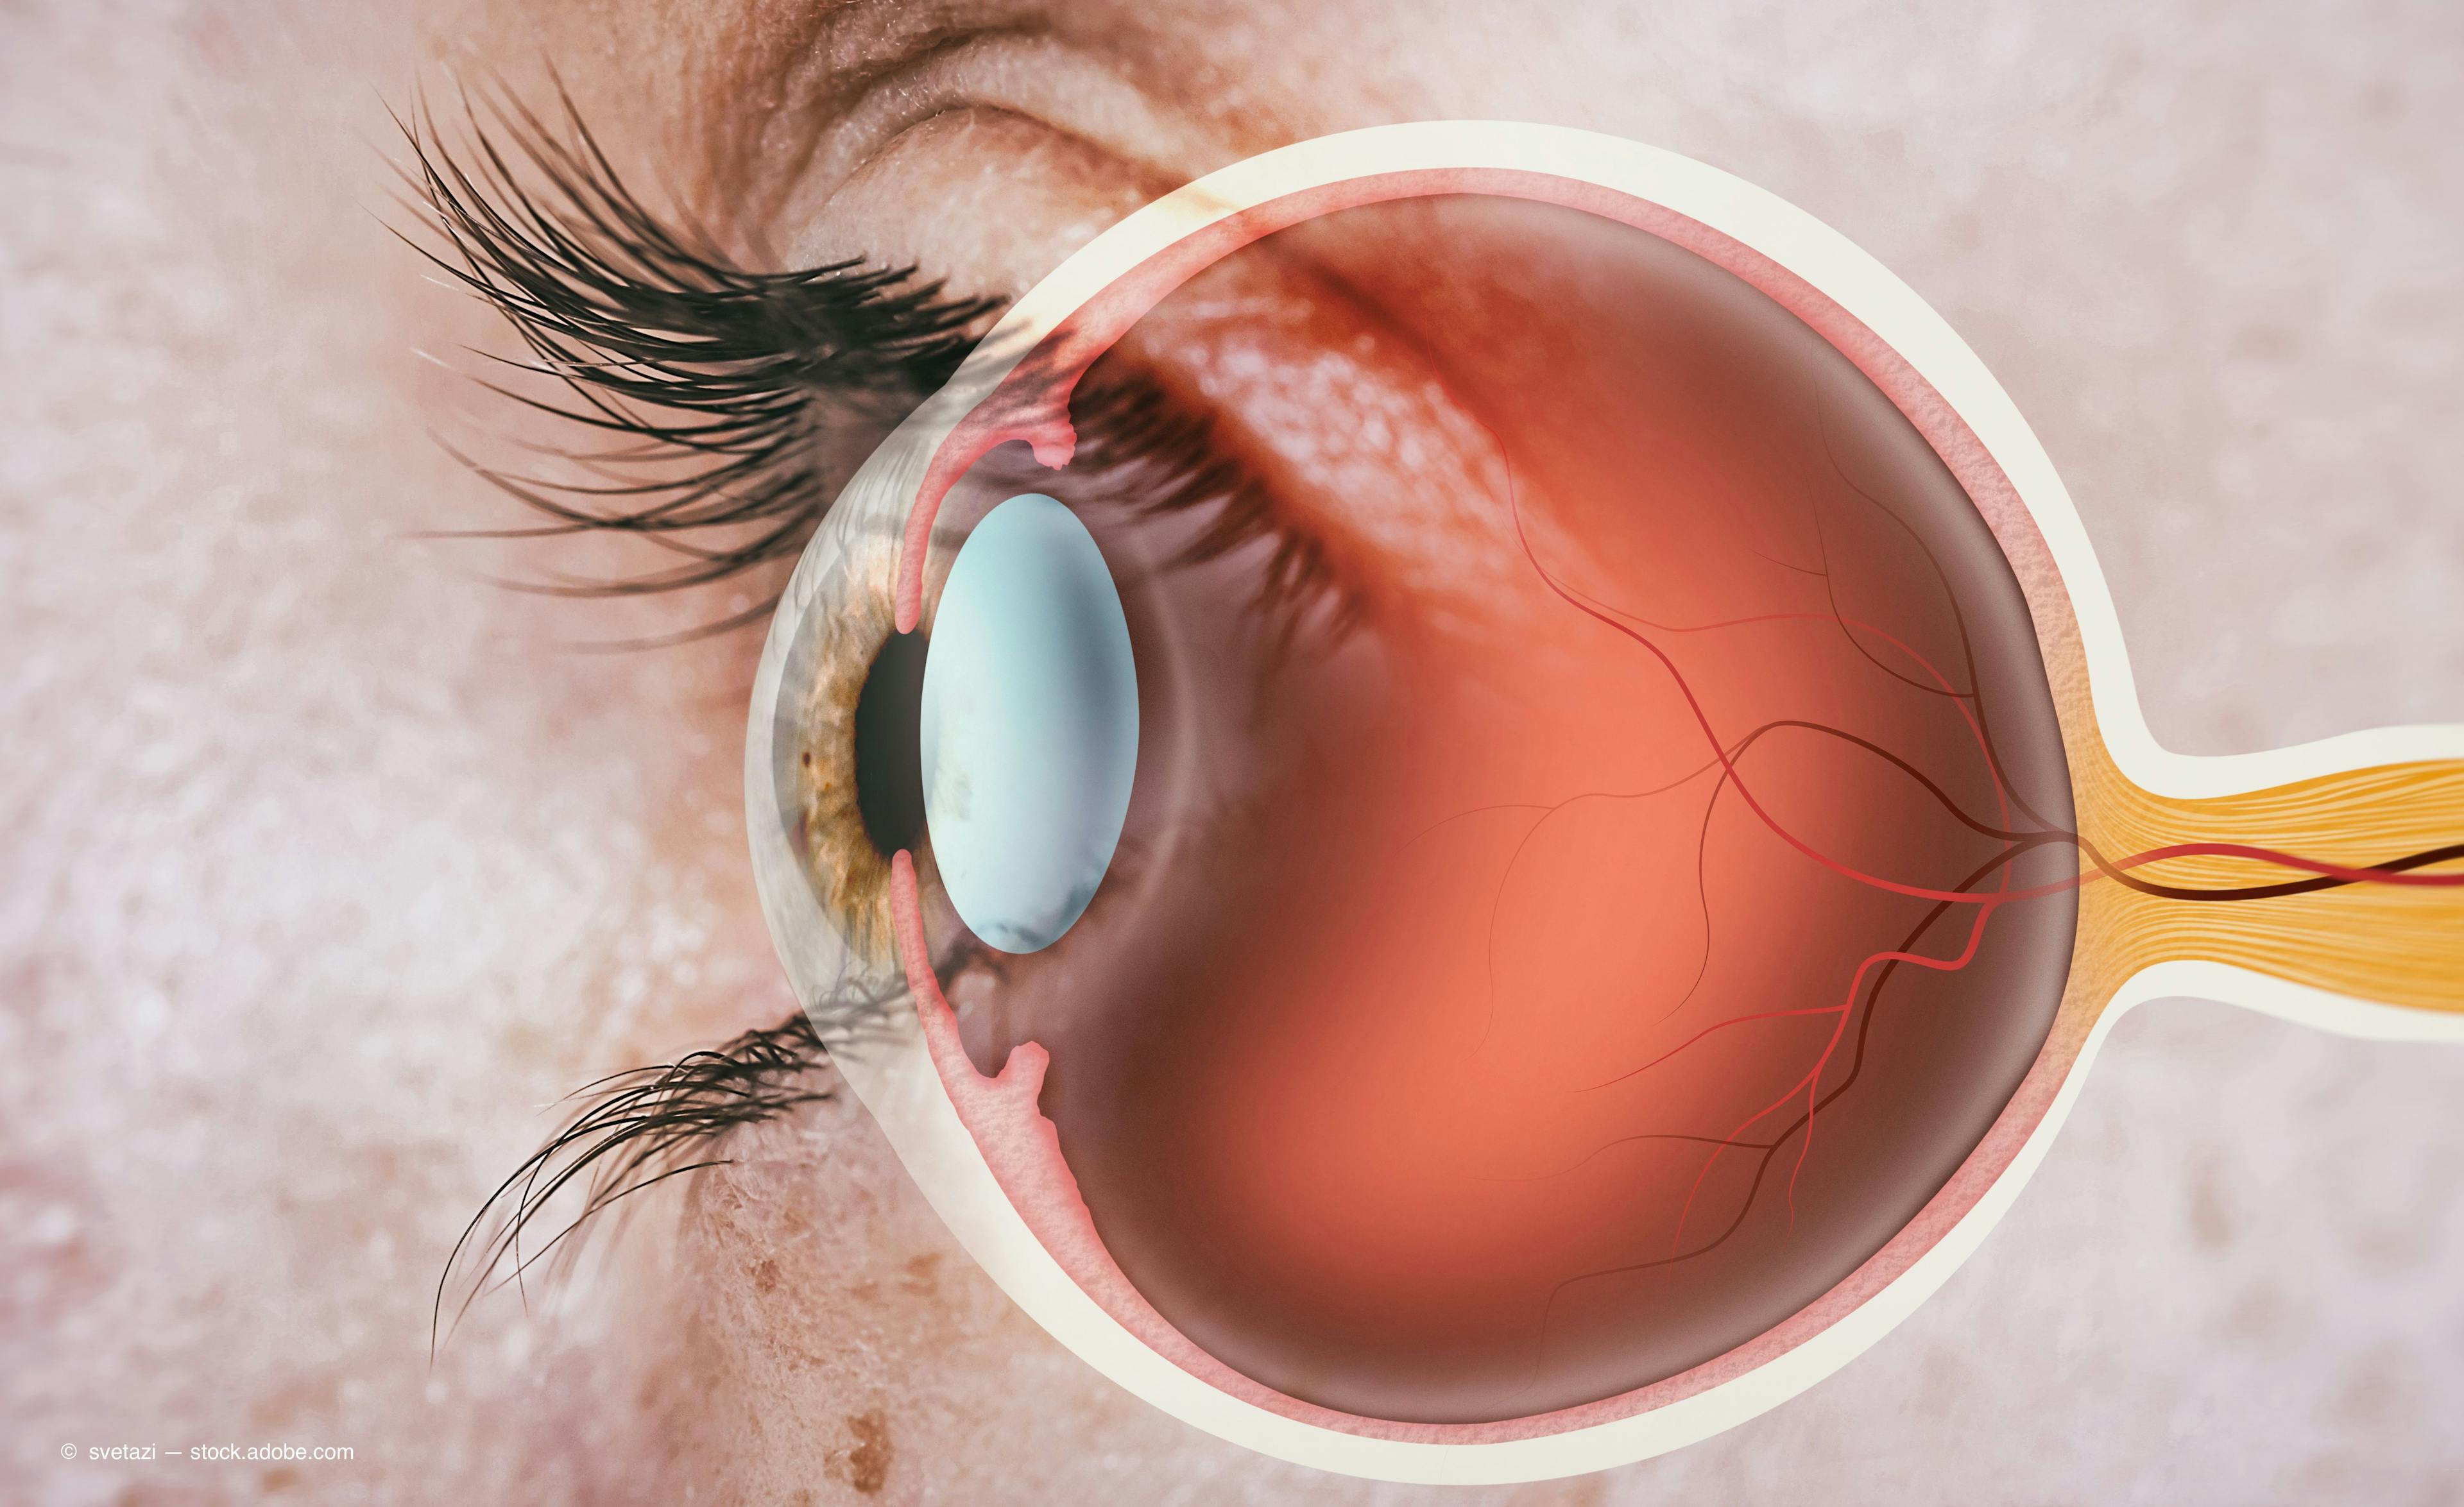 DED results in imbalance of neuropeptides, neurotrophins in the cornea and trigeminal ganglion